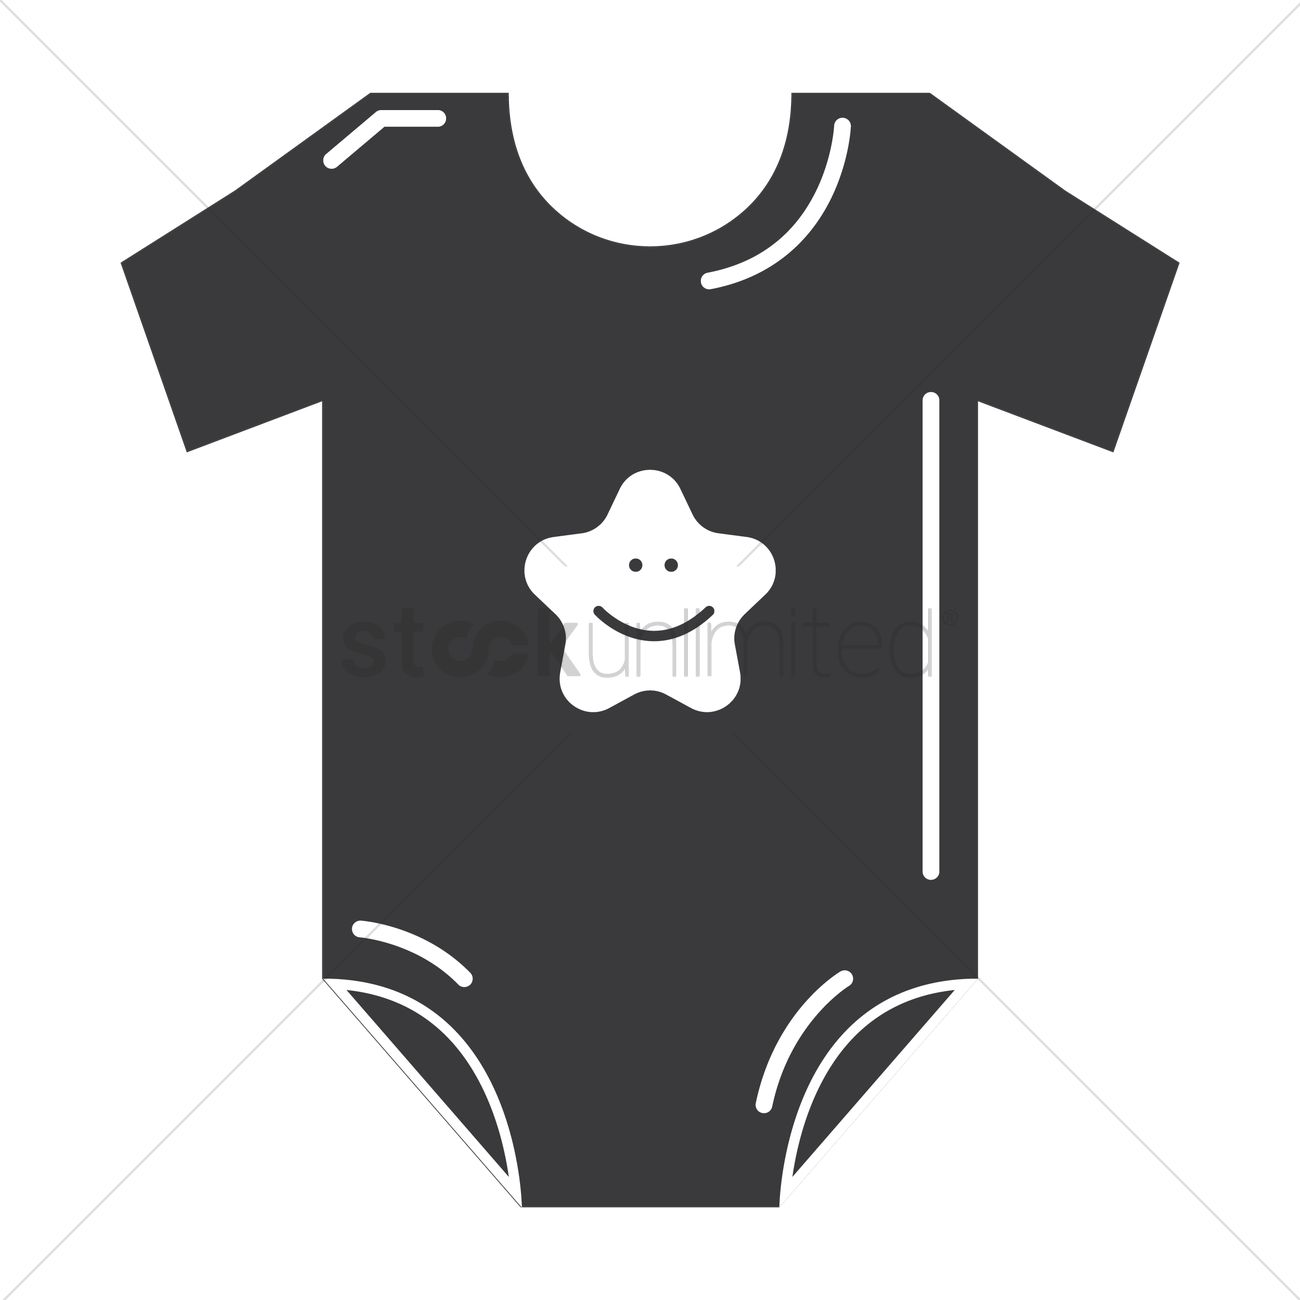 Download Baby Onesie Vector at GetDrawings.com | Free for personal ...